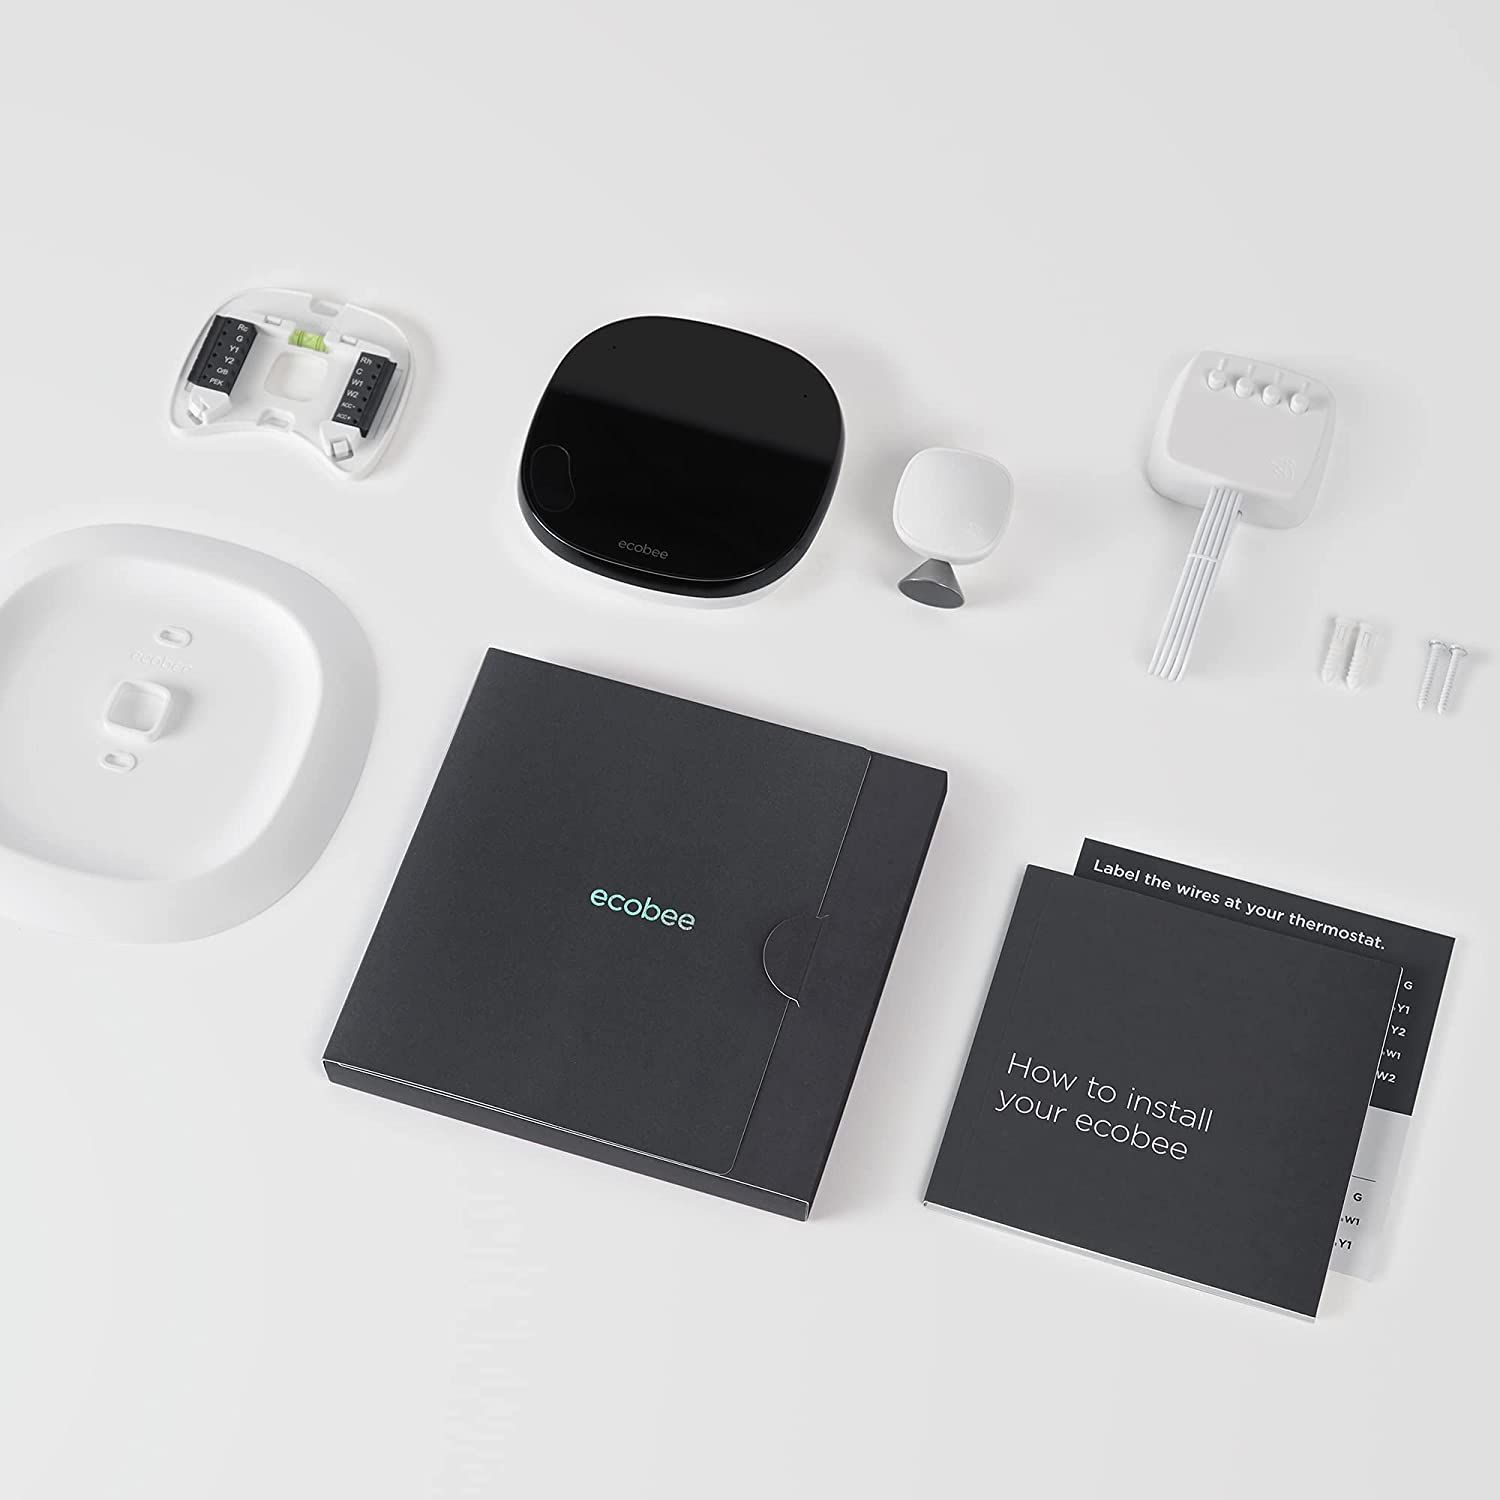 An image showing in-Box items of ecobee SmartThermostat